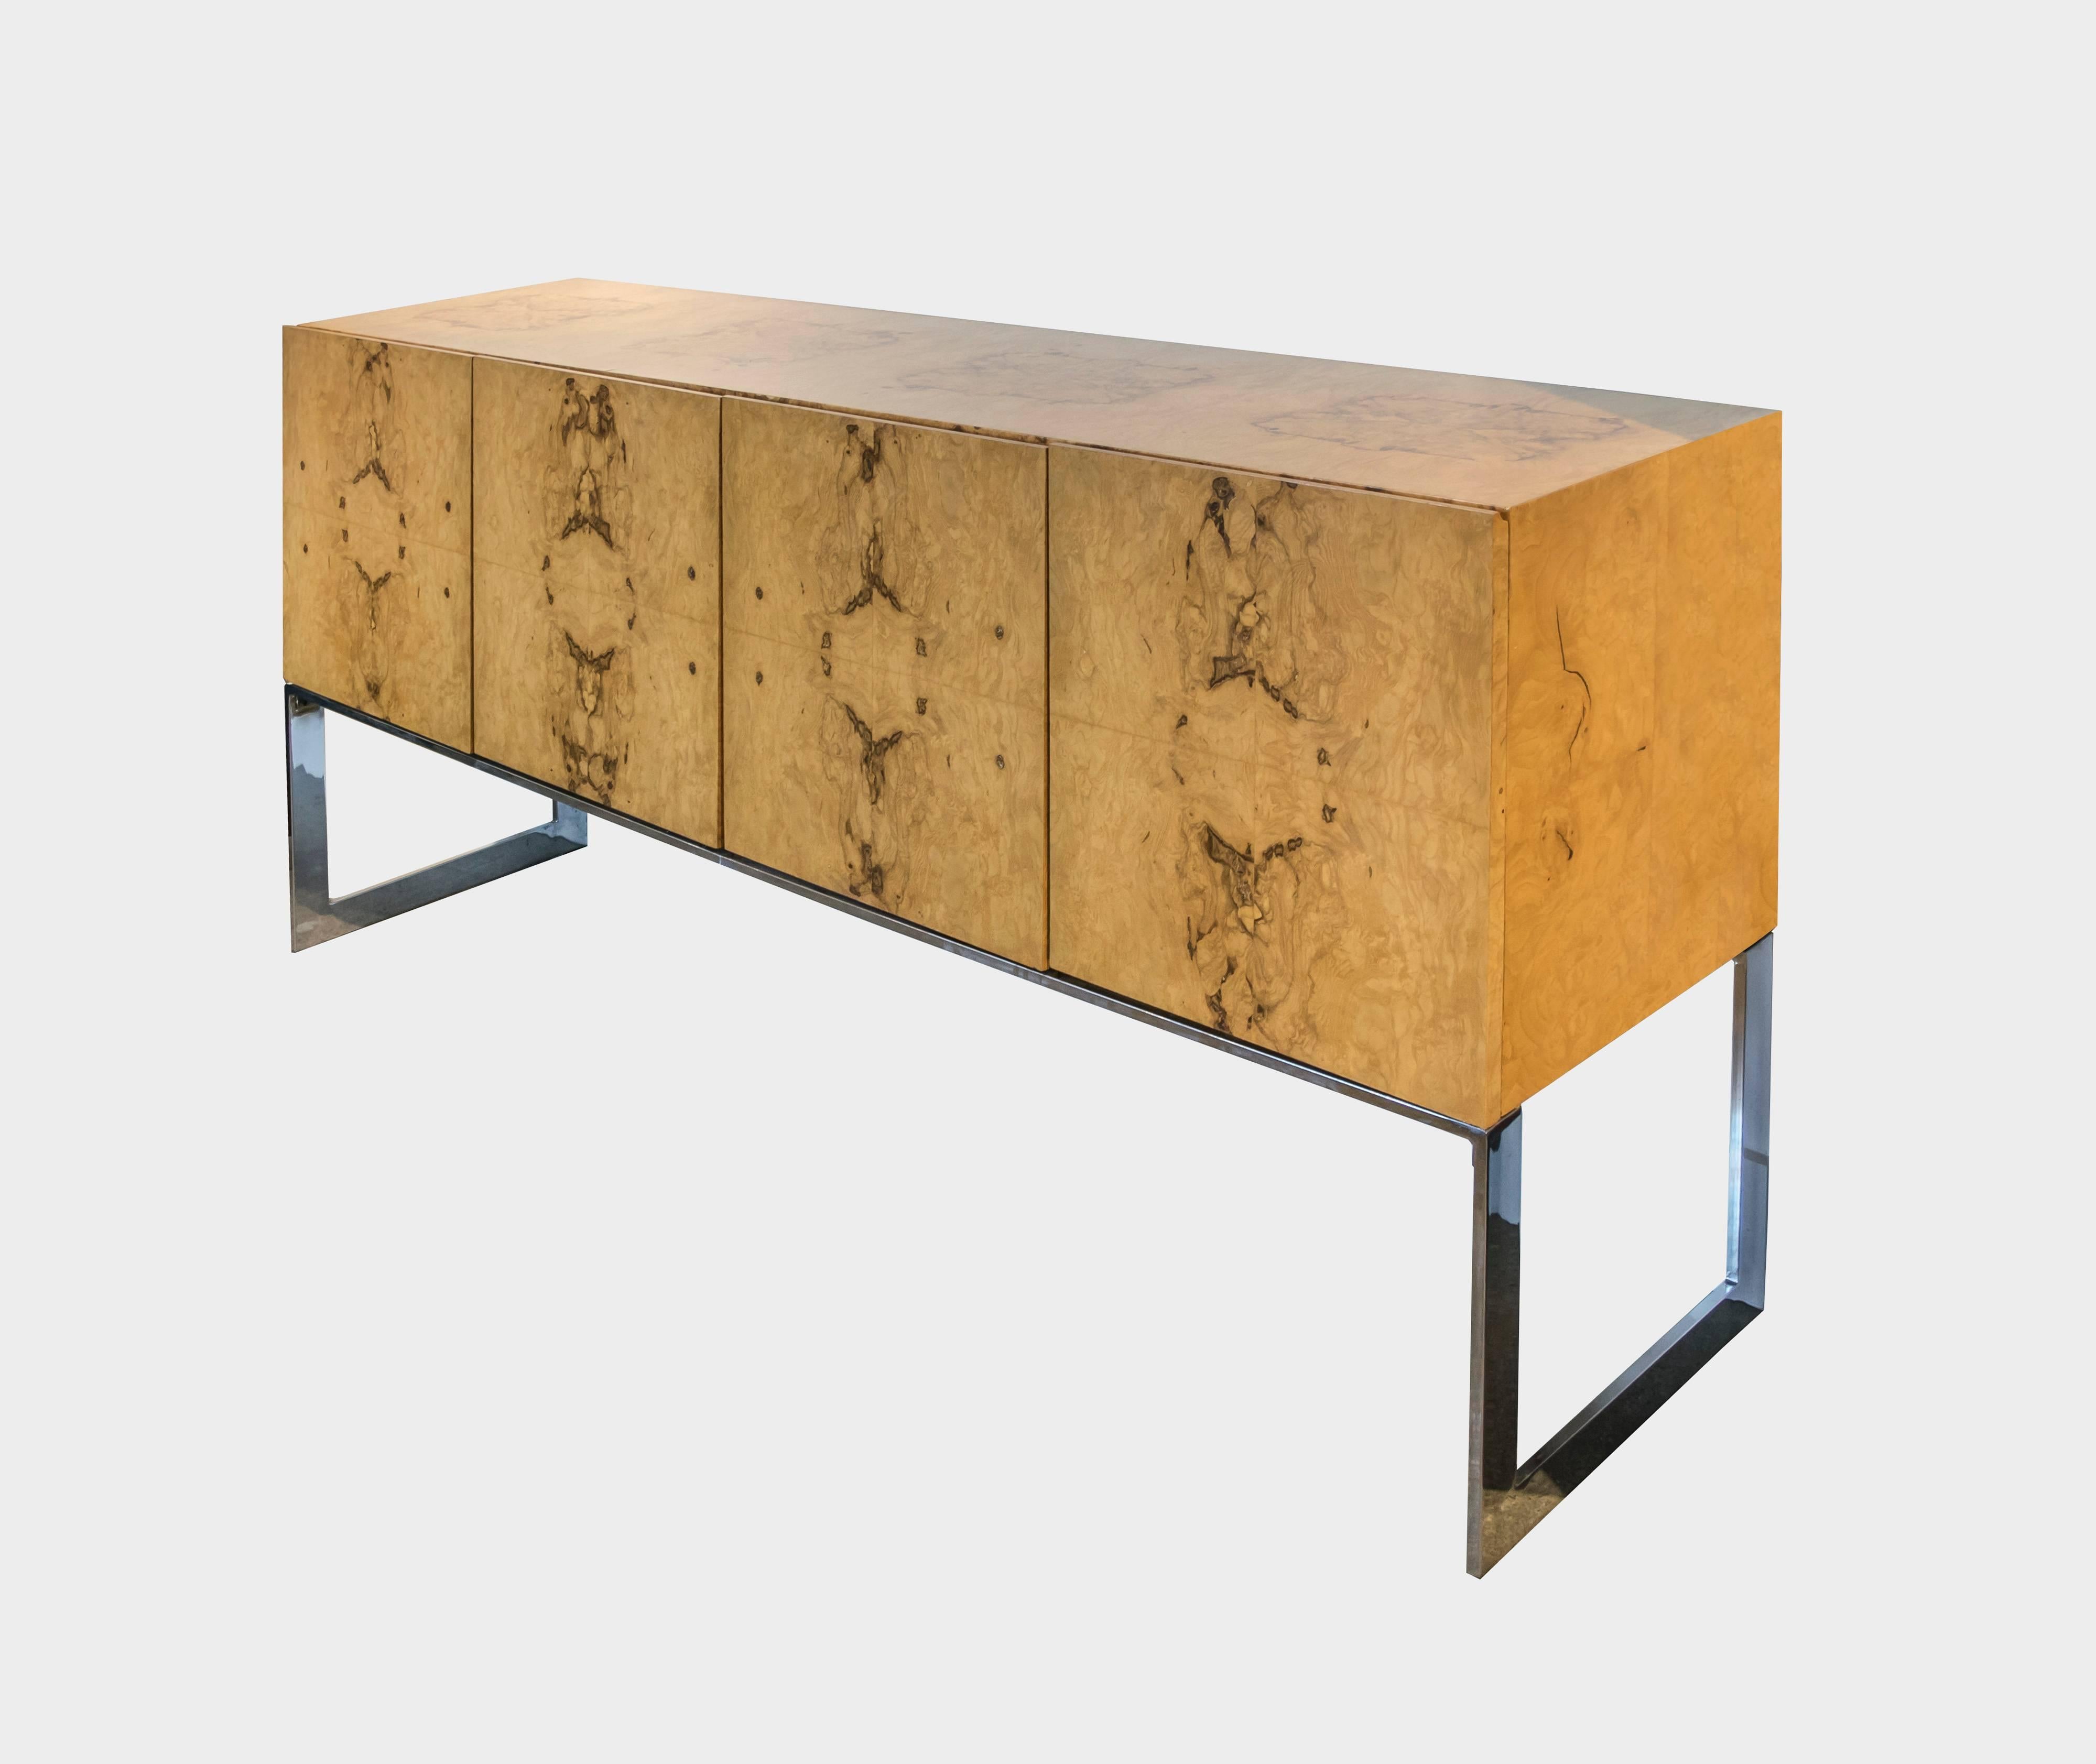 Rarely do we come across an actual Milo Baughman for Thayer Coggin gorgeous buffet or credenza. It features two silver lined drawers for cutlery and utensils on one side and on the other side there are two shelfs, one made of smoked glass and the